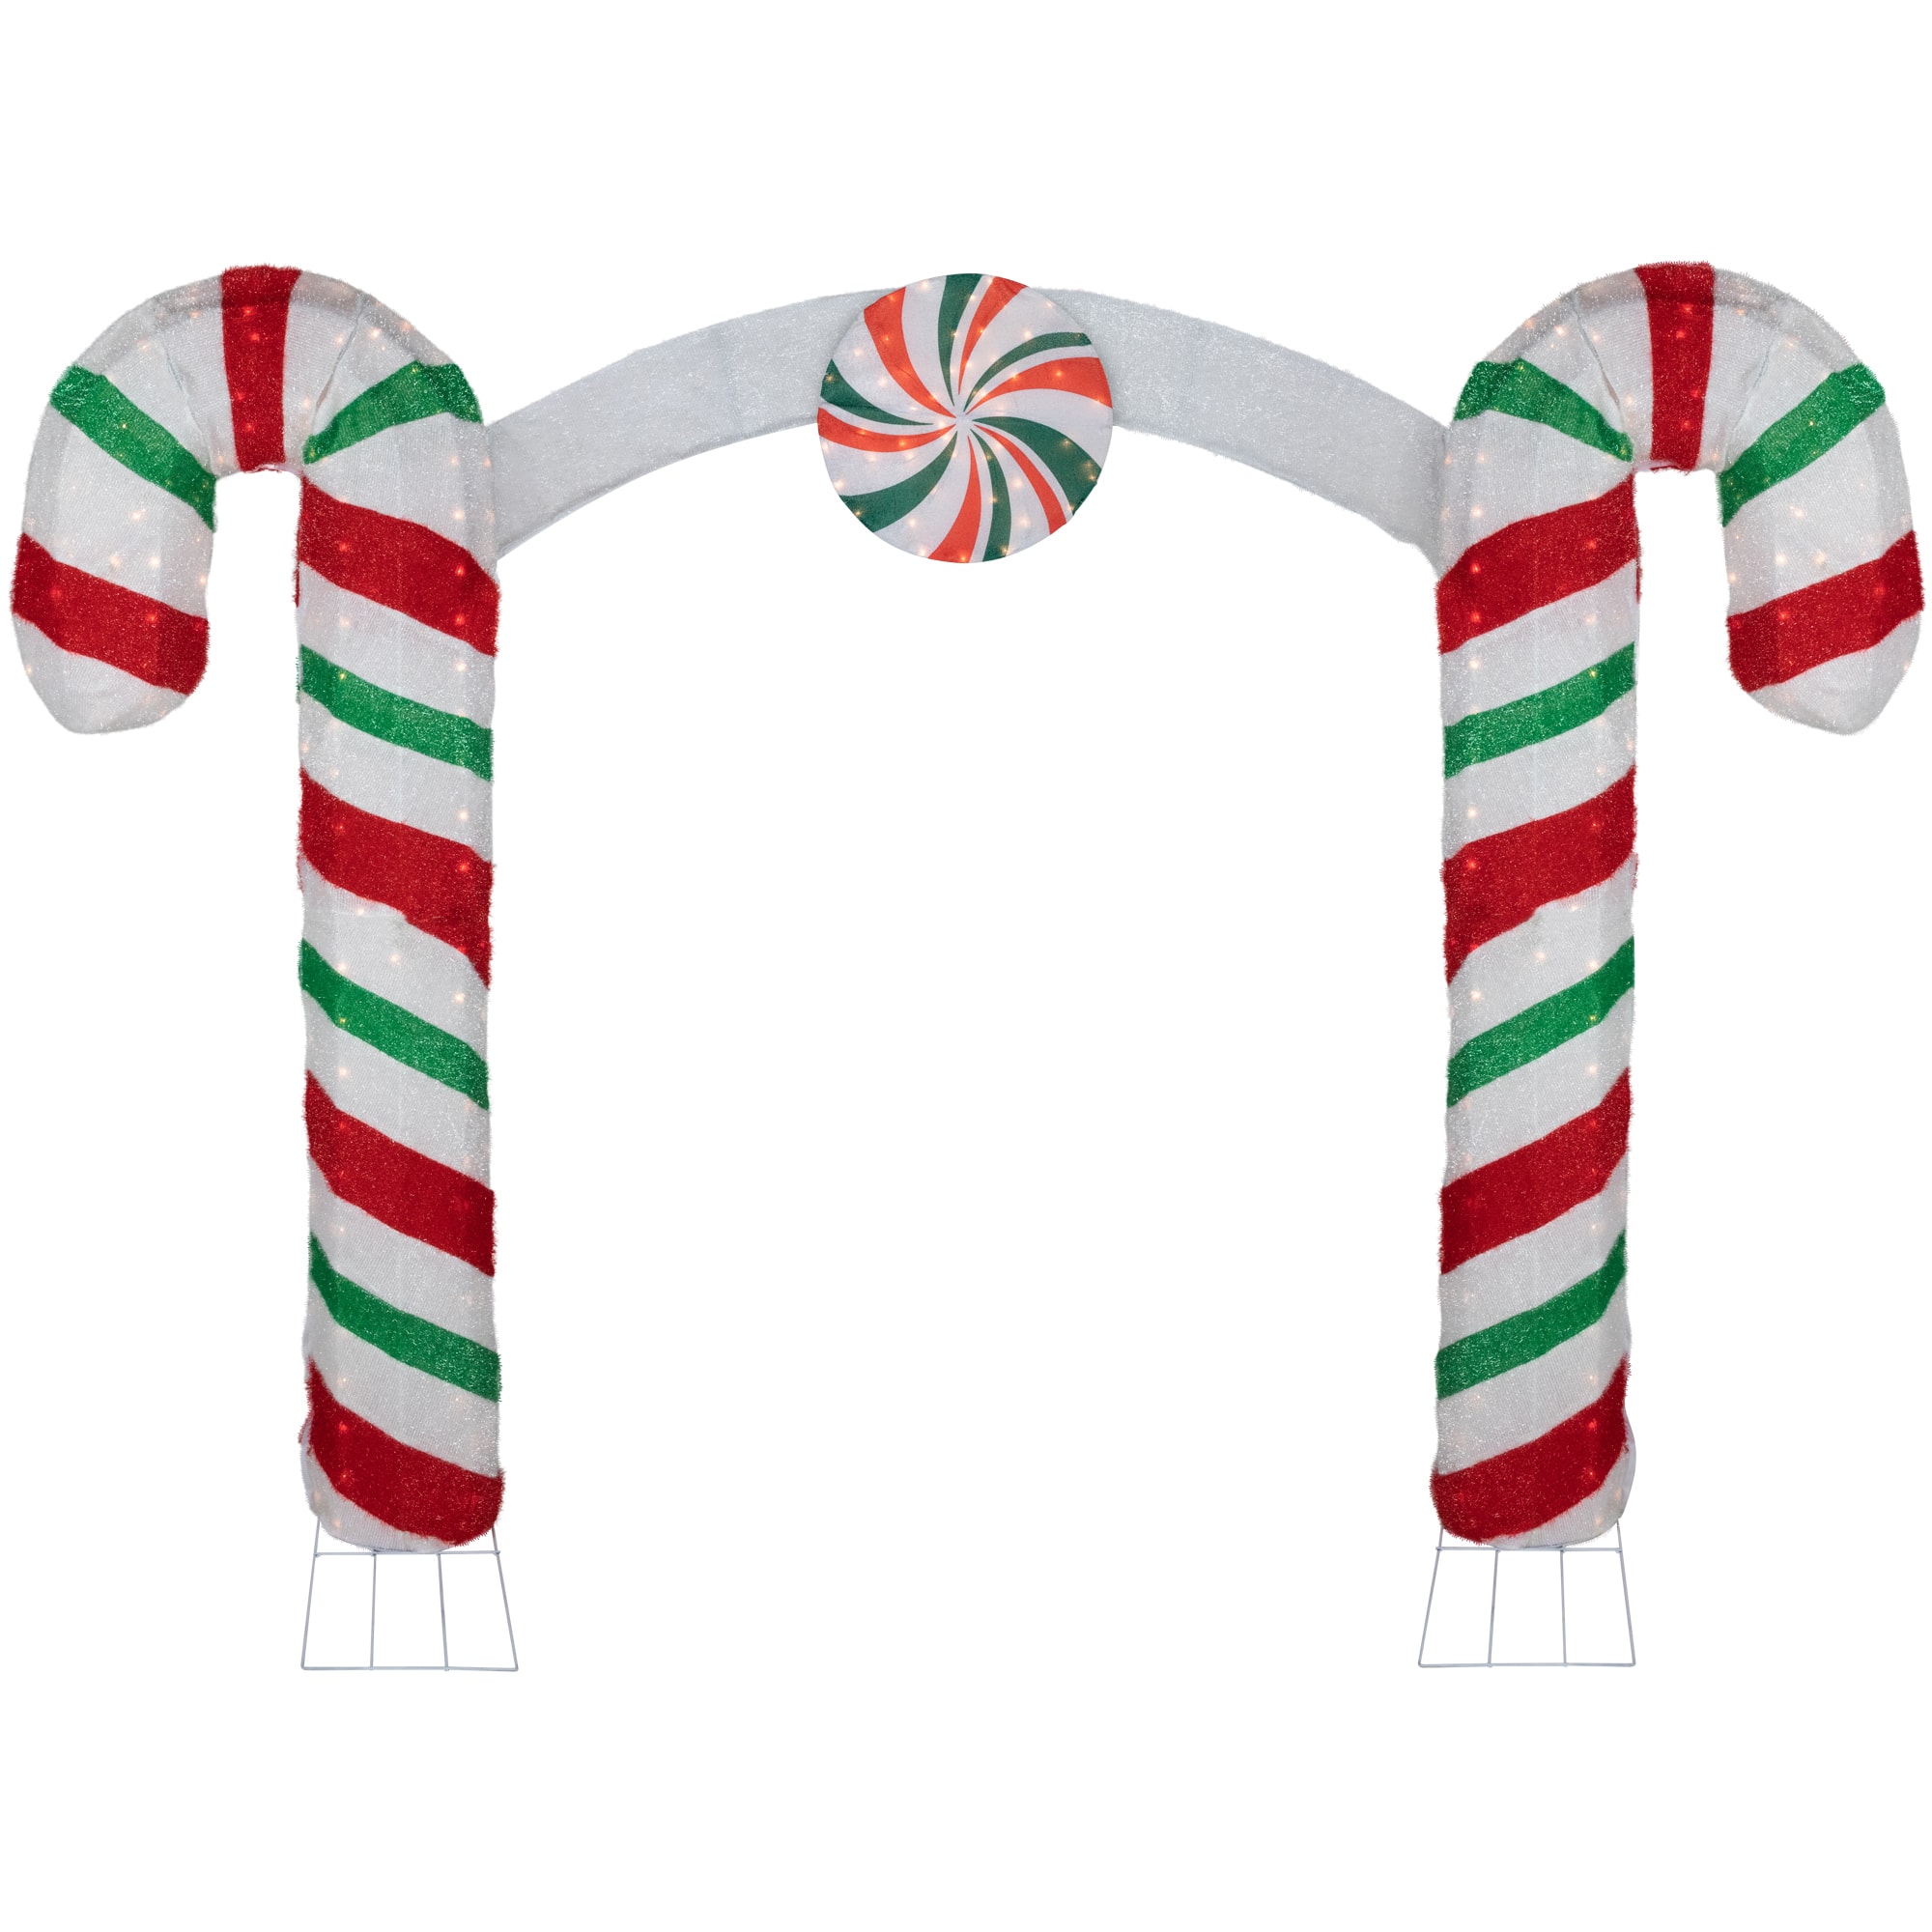 7ft. Lighted Double Candy Cane Archway Outdoor Christmas Decoration